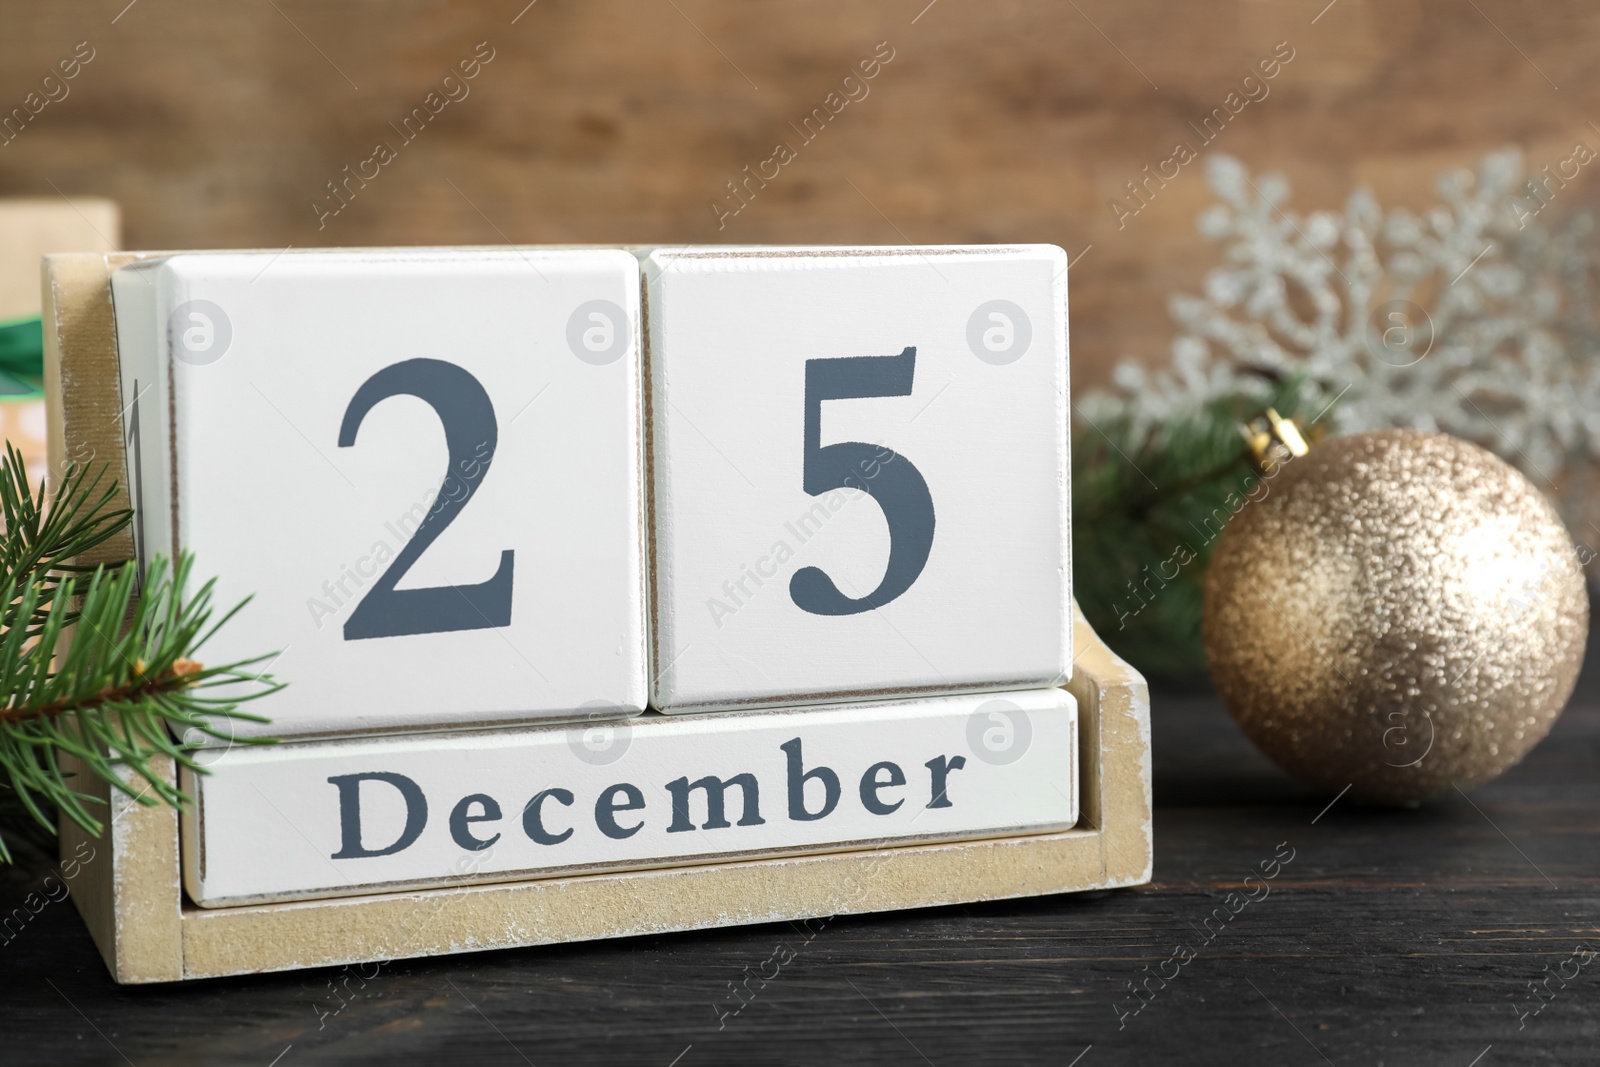 Photo of Block calendar and festive decor on black wooden table. Christmas countdown